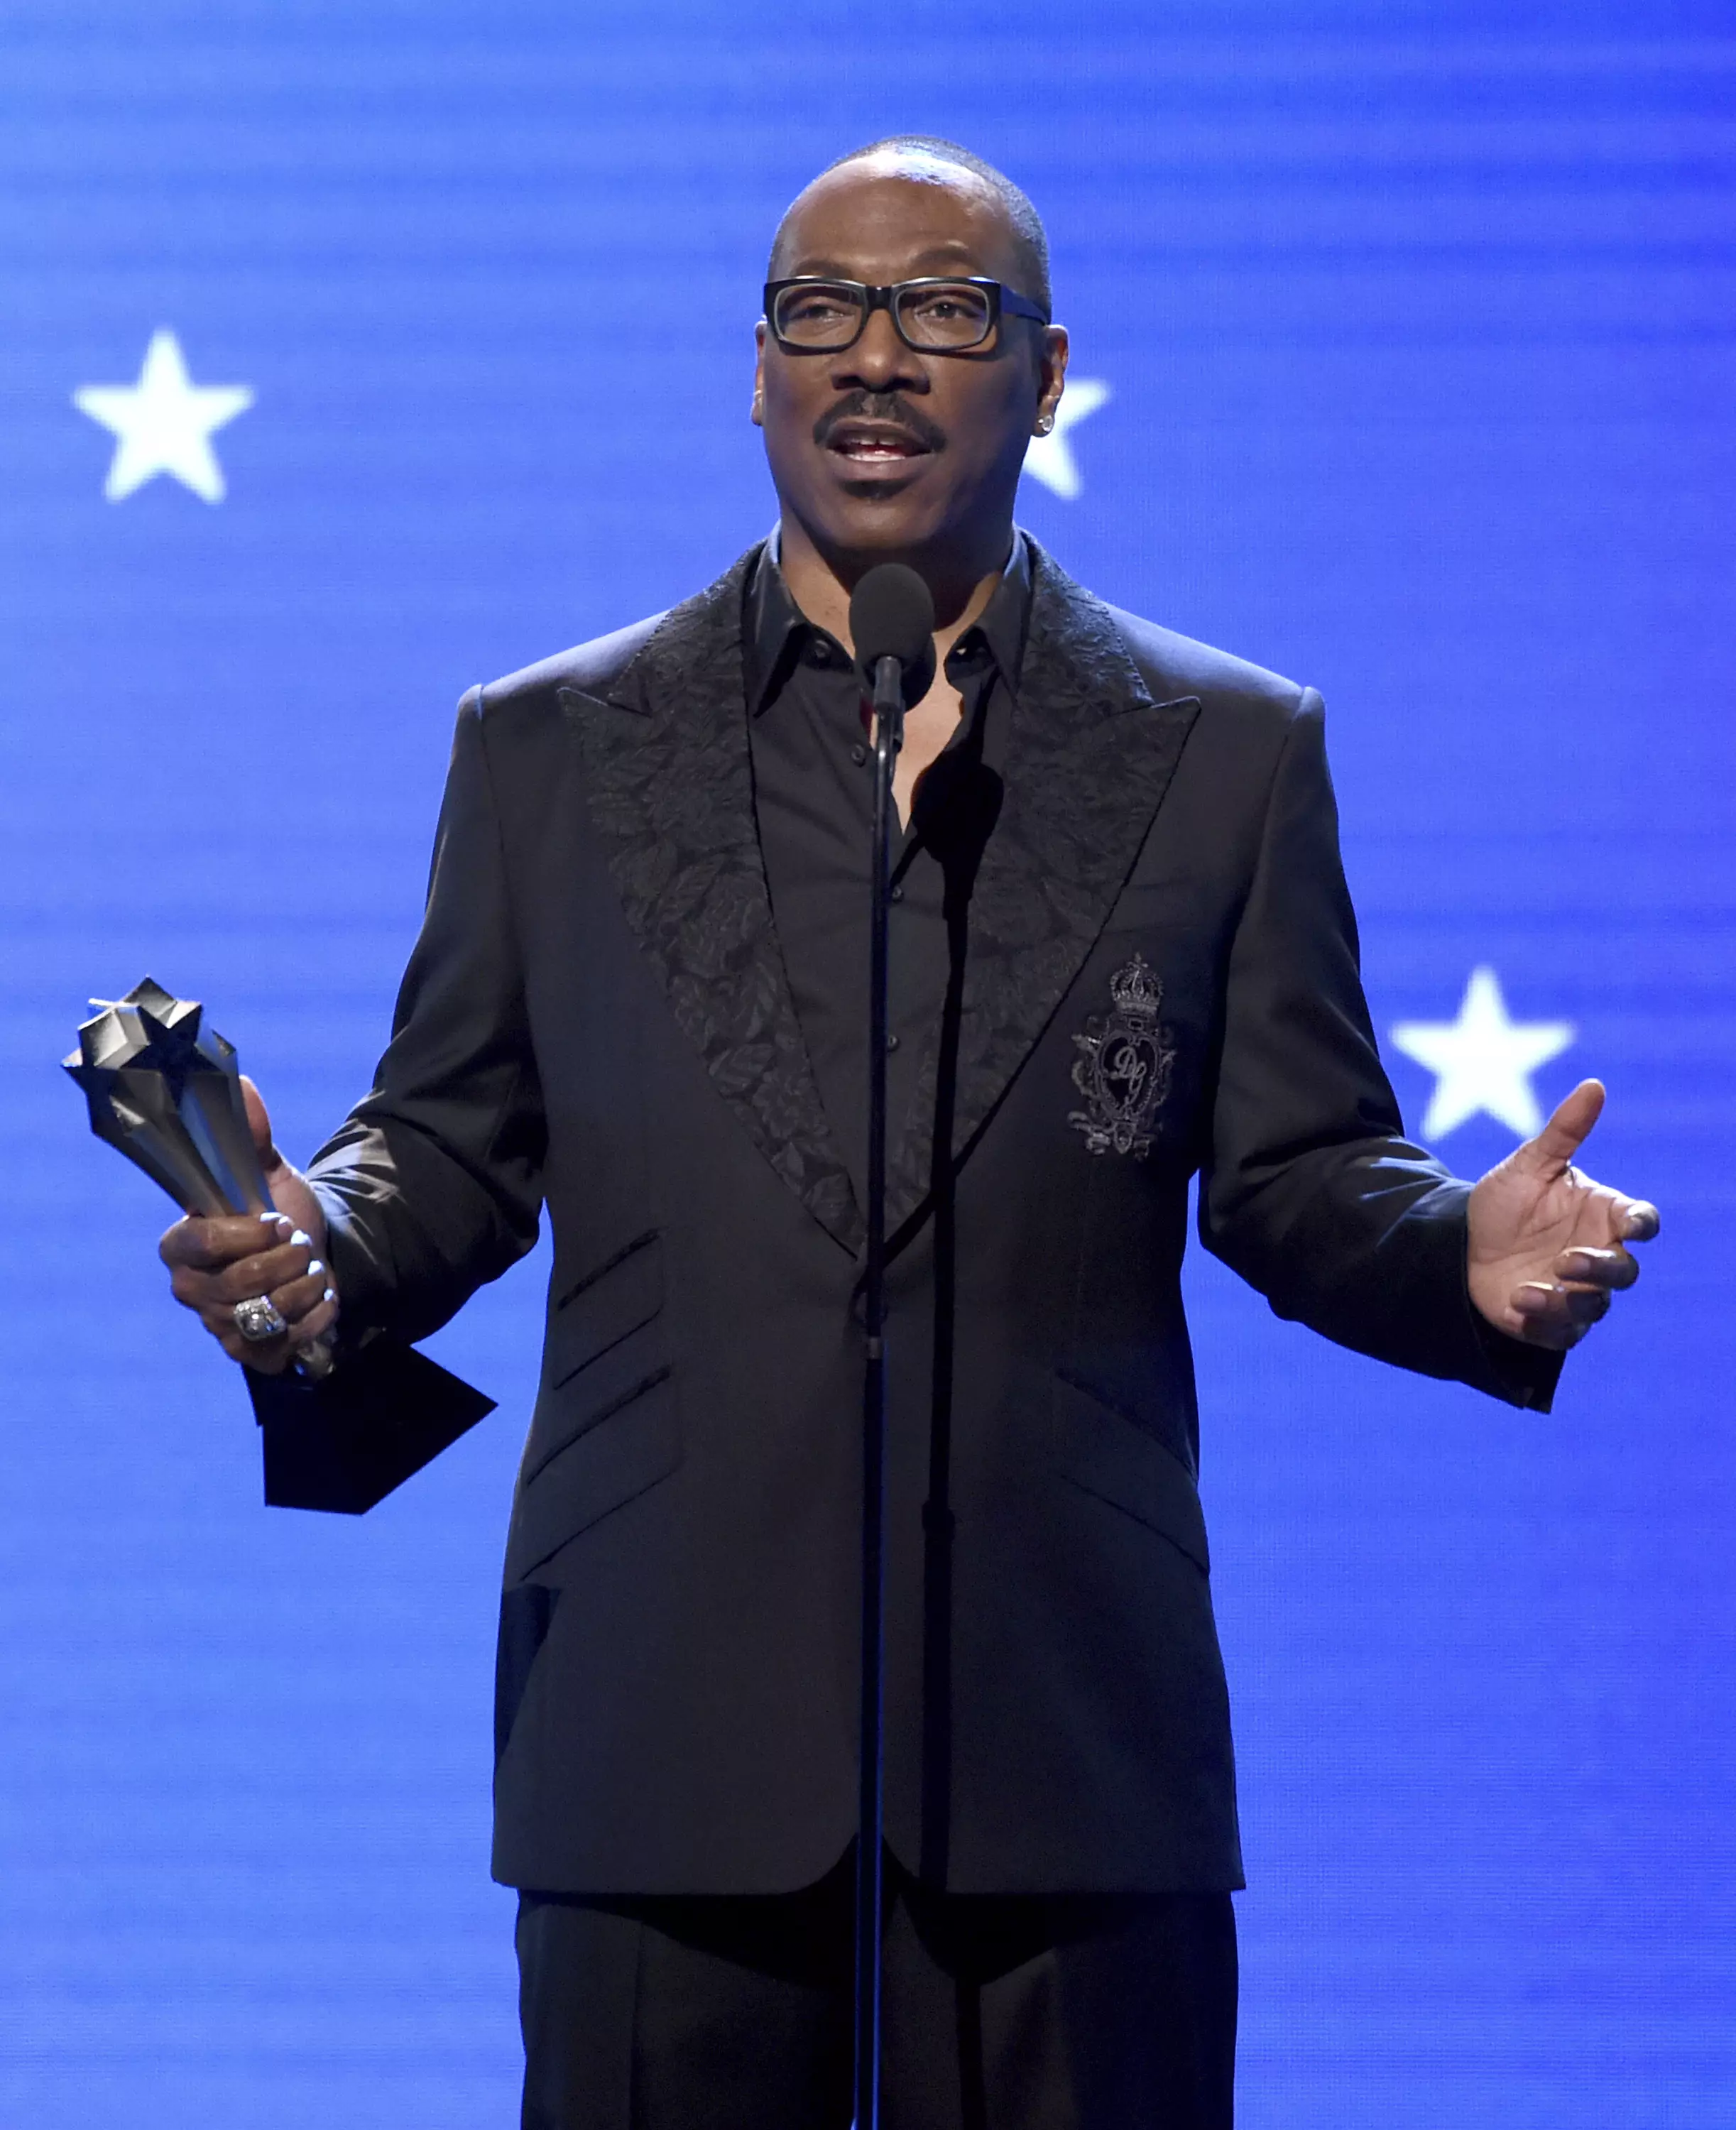 Eddie Murphy said he 'even played a spaceship once'.